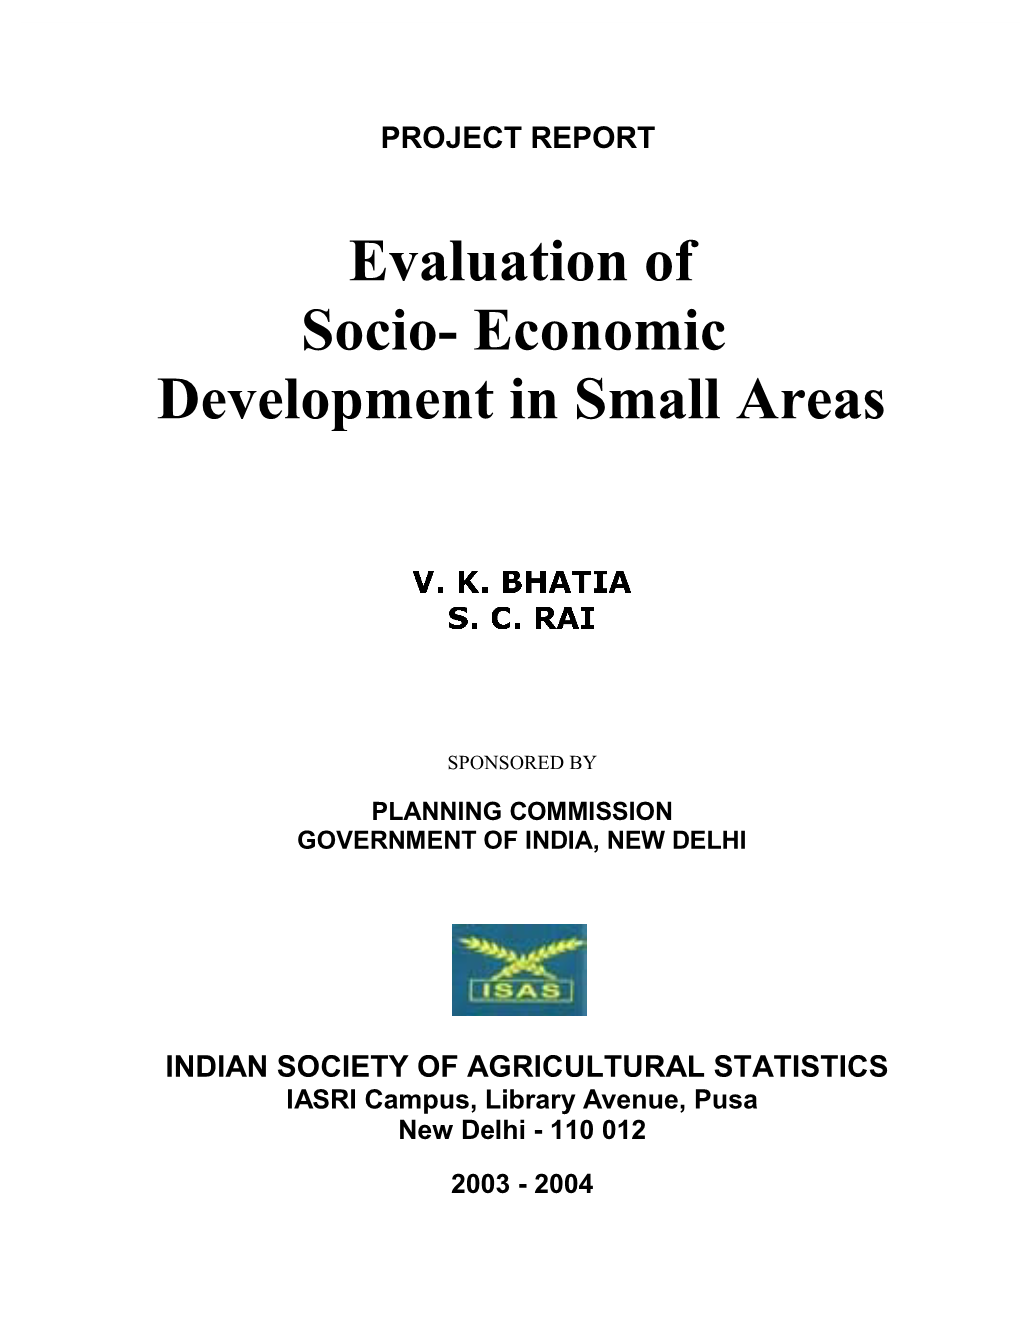 Evaluation of Socio-Economic Development in Small Areas Was Undertaken by Indian Society of Agricultural Statistics, New Delhi